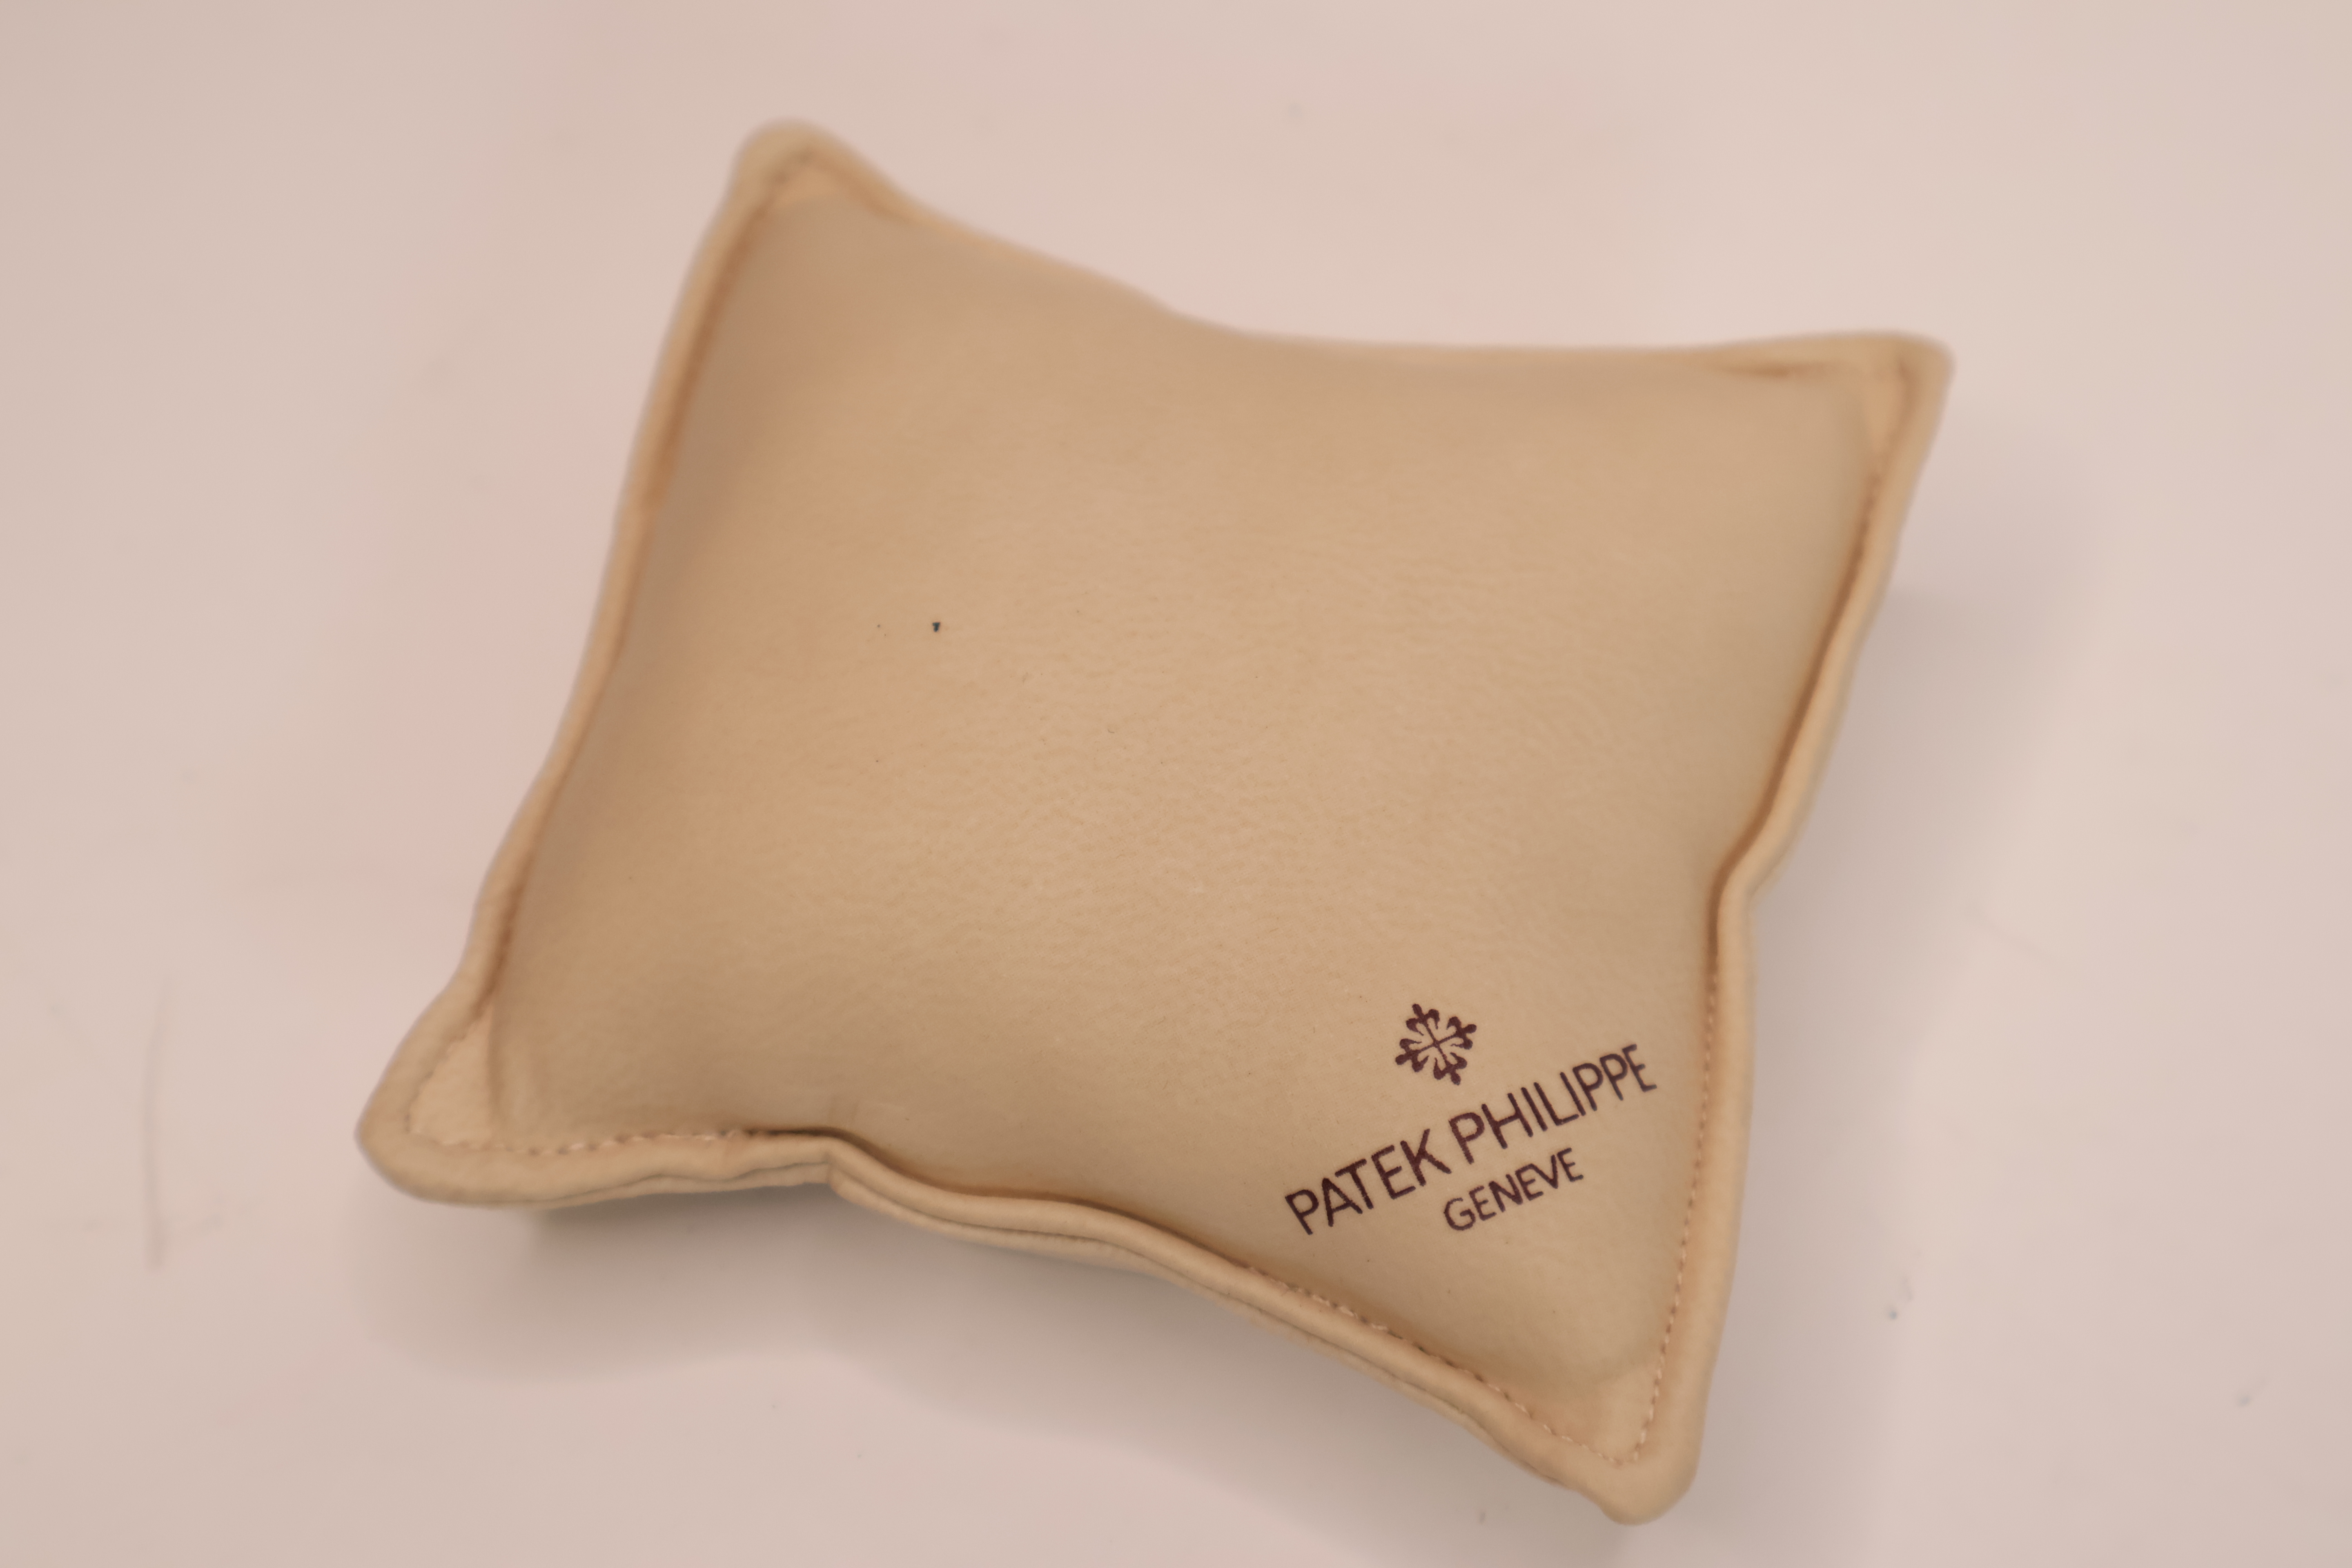 *To Be Sold Without Reserve* Patek Philippe cream branded cushion